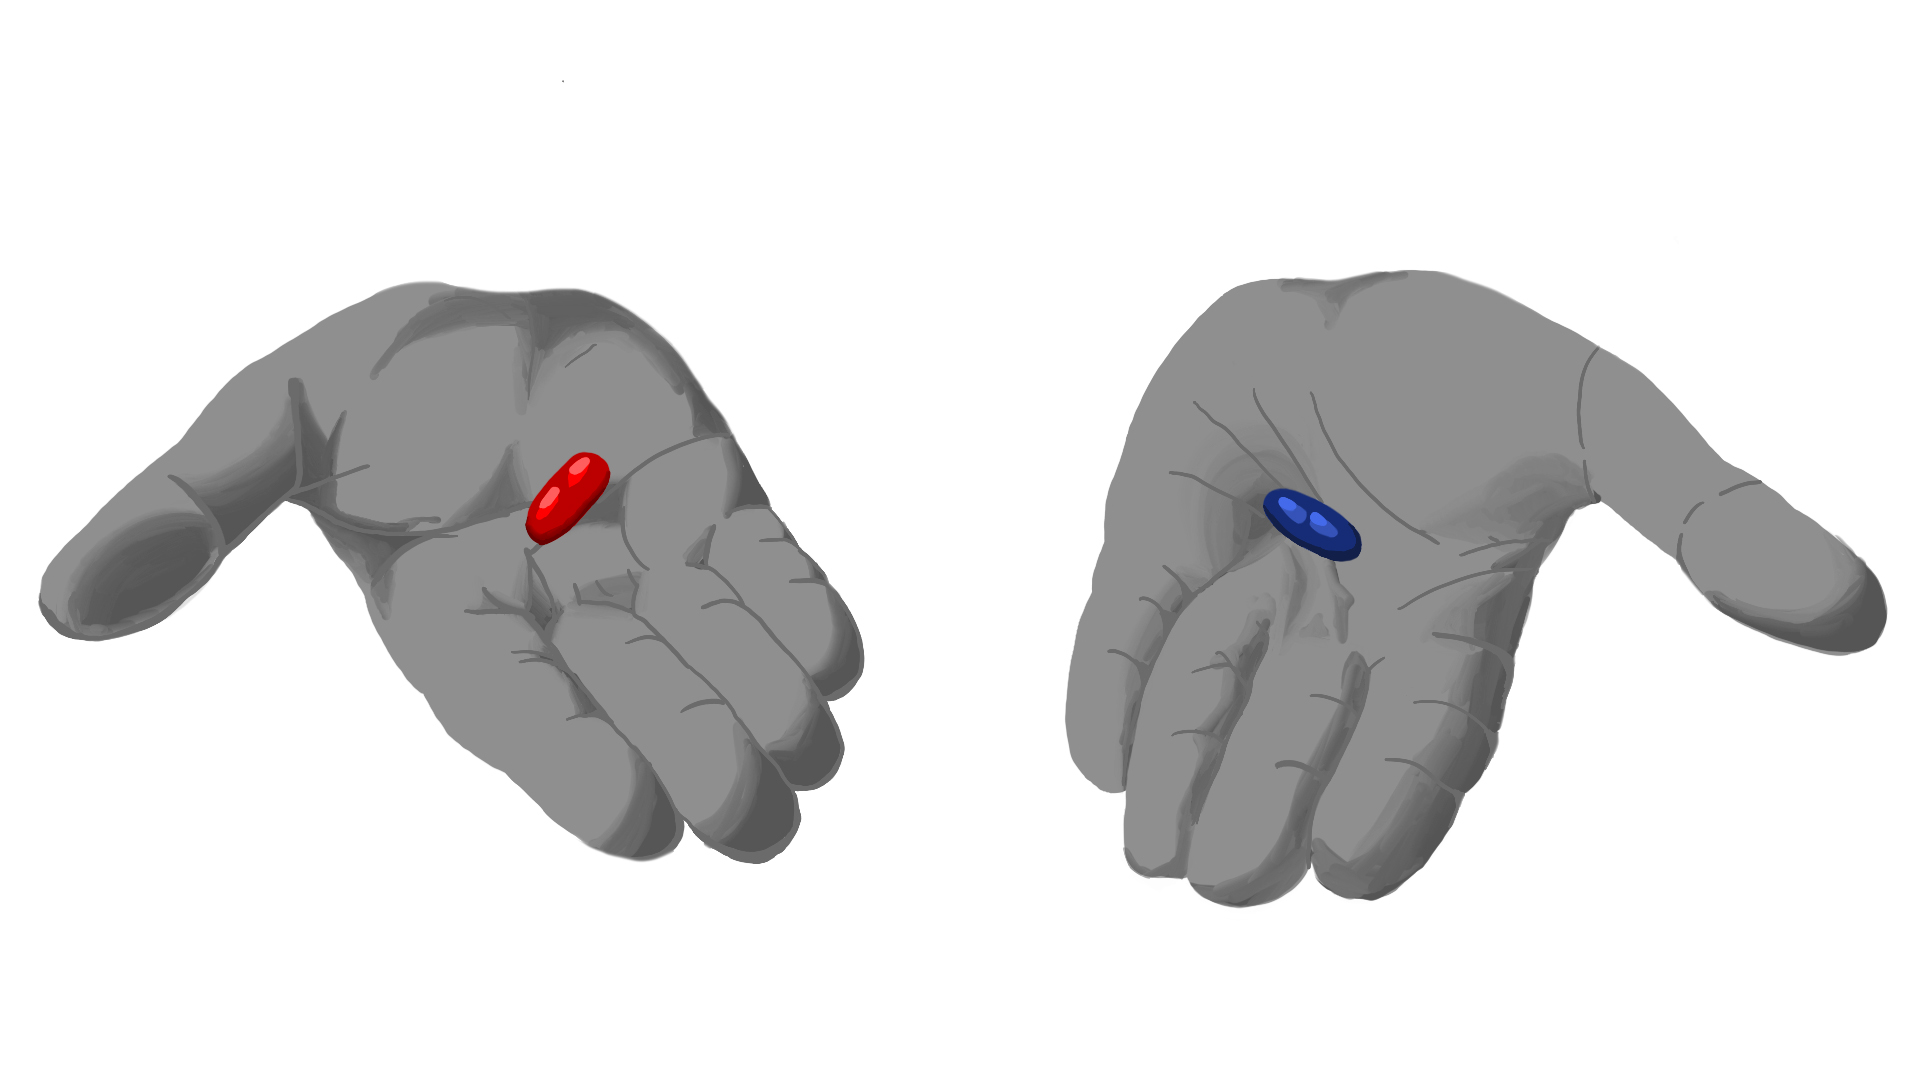 Hands showing a red pill and blue pill